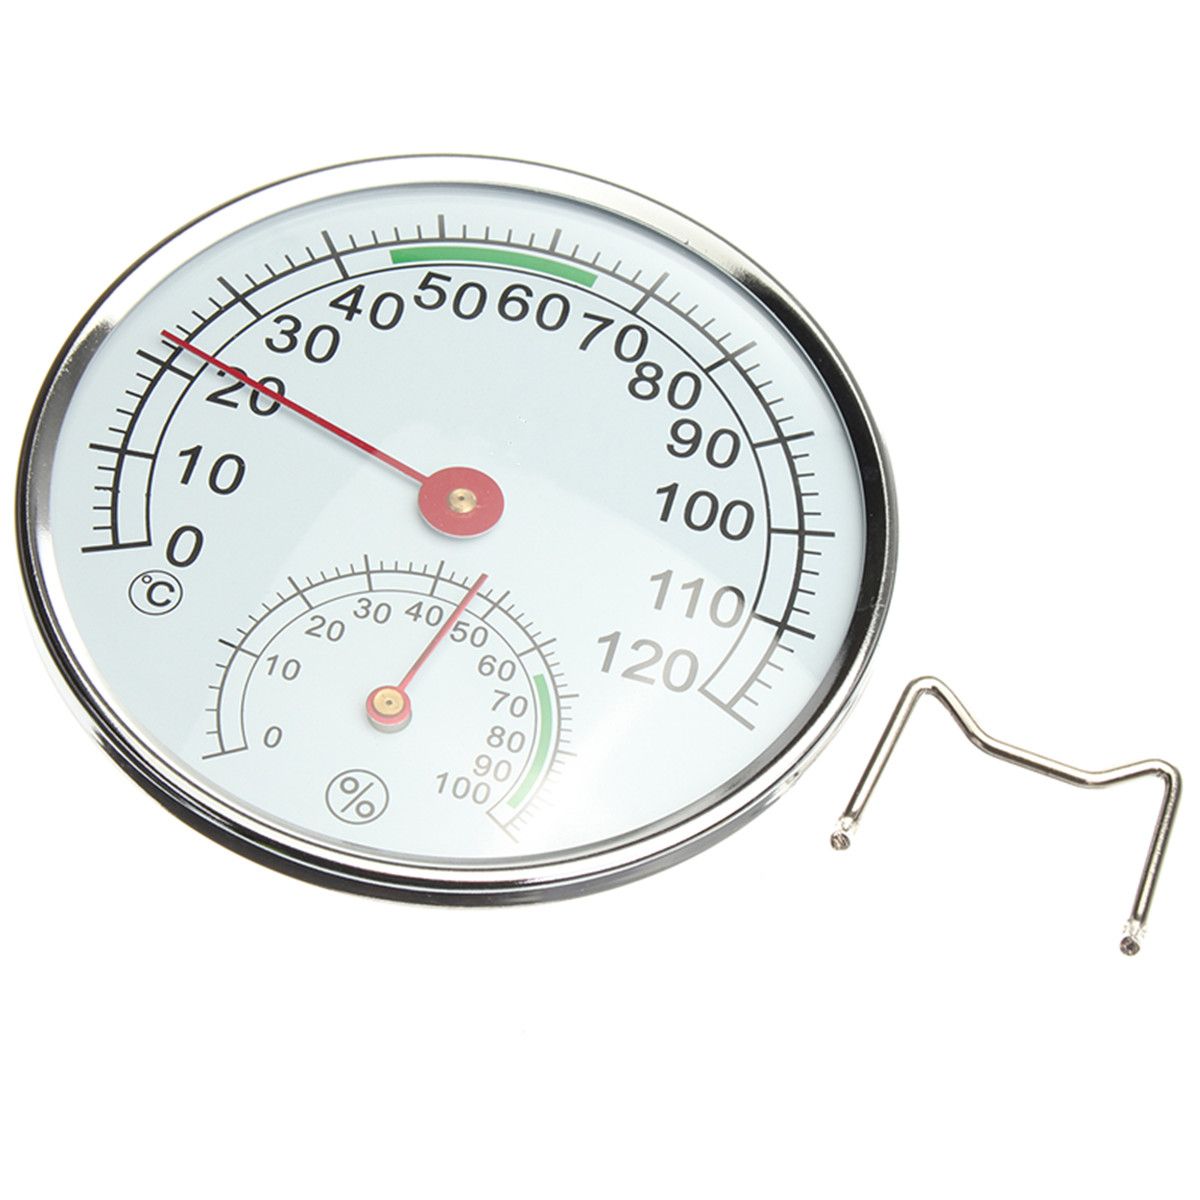 Stainless-Steel-ThermometerHygrometer-for-Sauna-Room-Temperature-Humidity-Meter-1279162